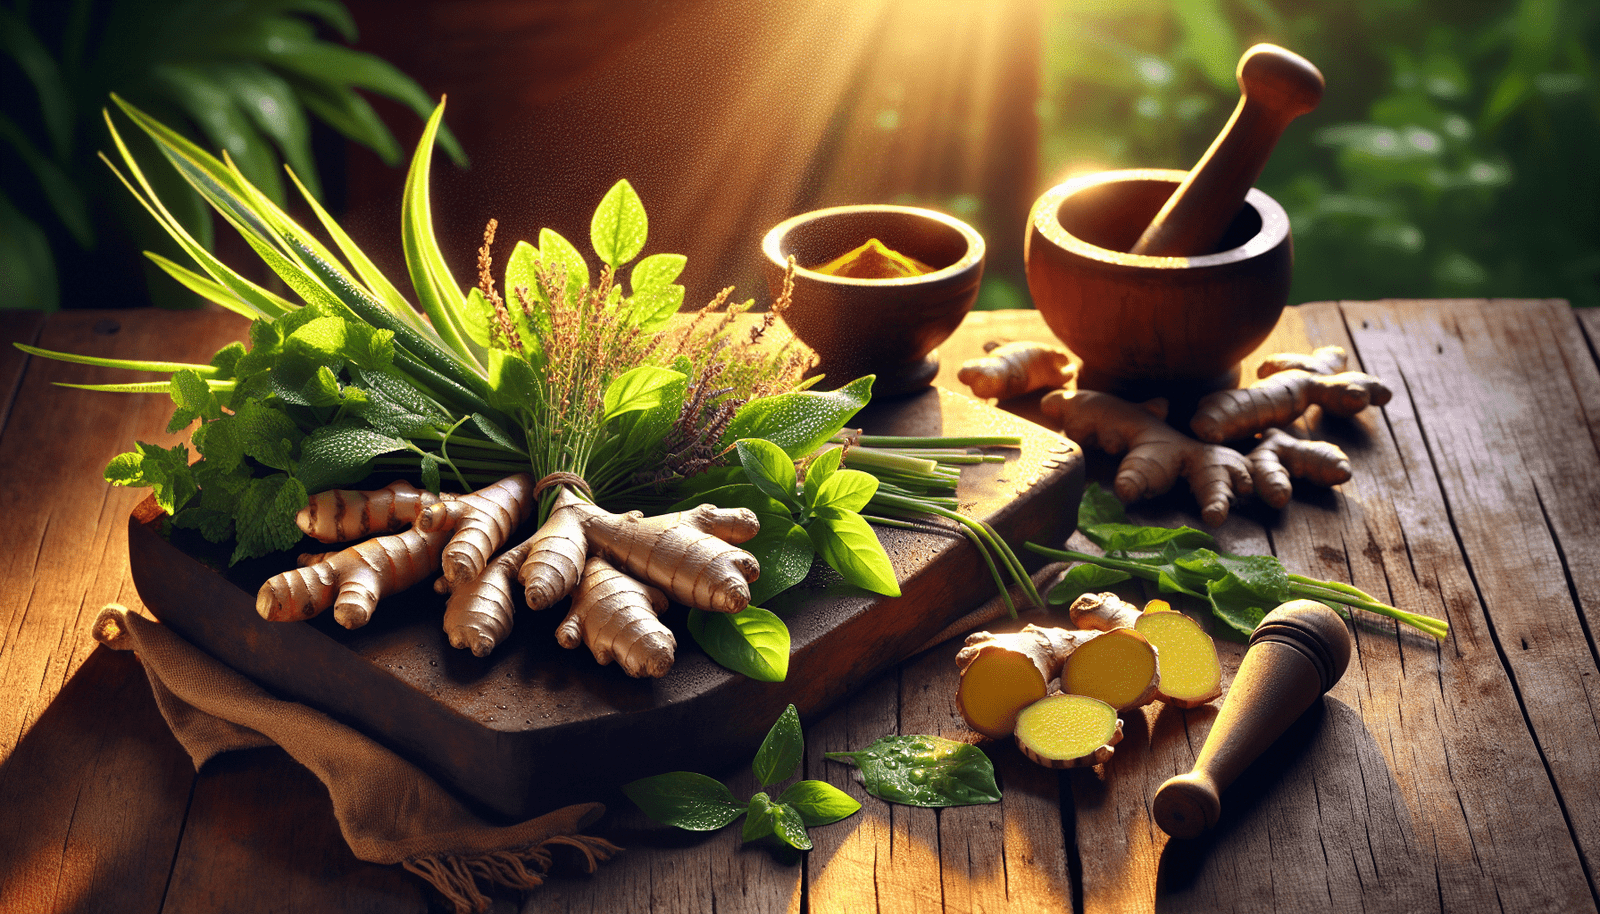 Food As Medicine: 5 Culinary Herbs With Powerful Medicinal Properties